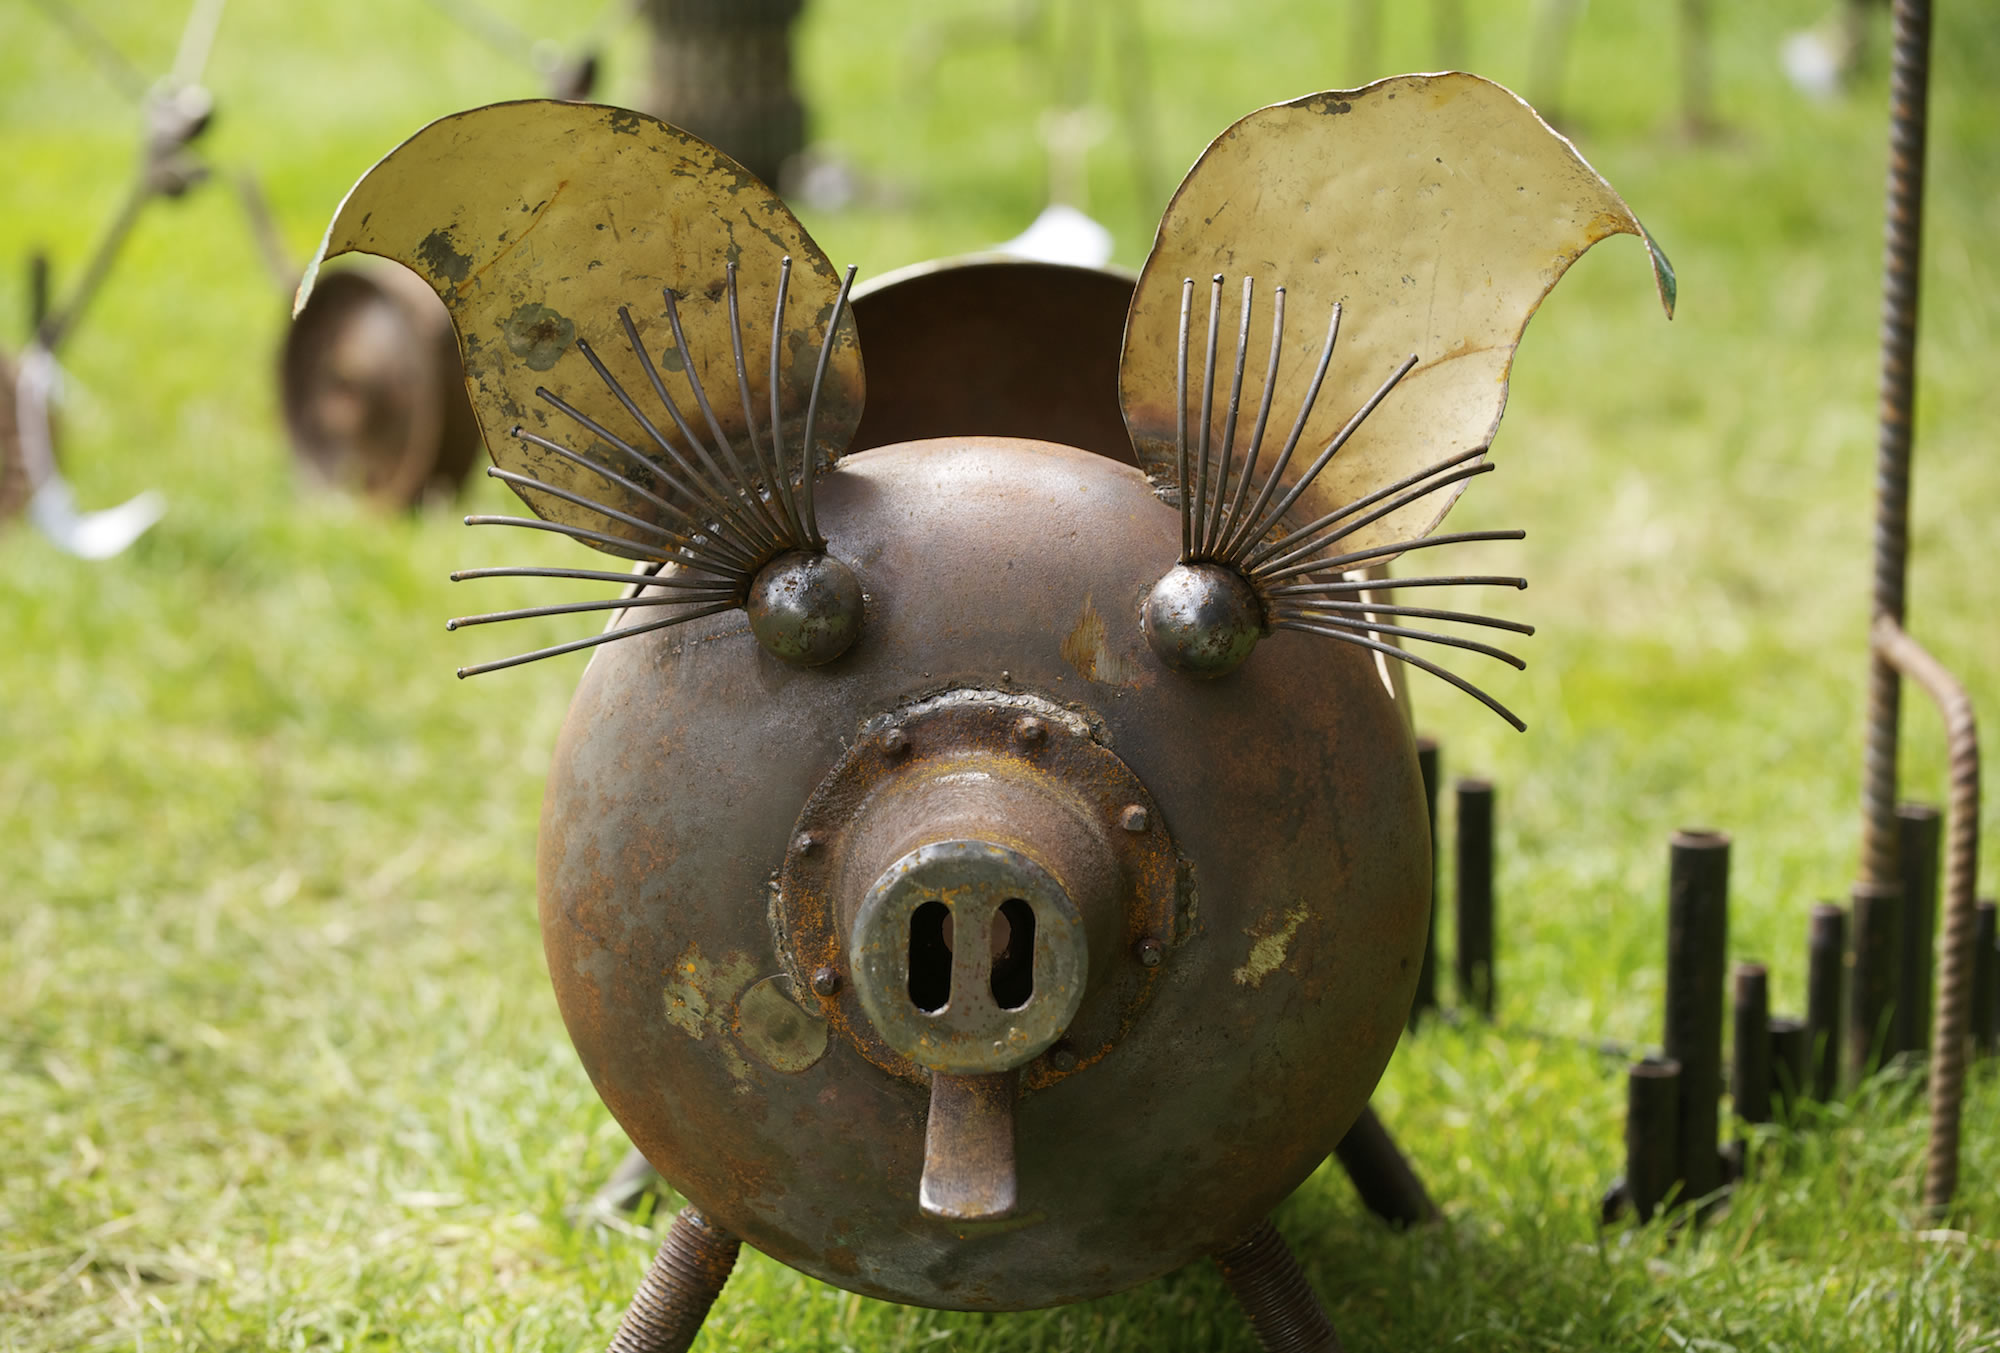 Artwork at the 2012 Recycled Arts Festival included a pig made from recycled metal by Cedar Creek Inc.